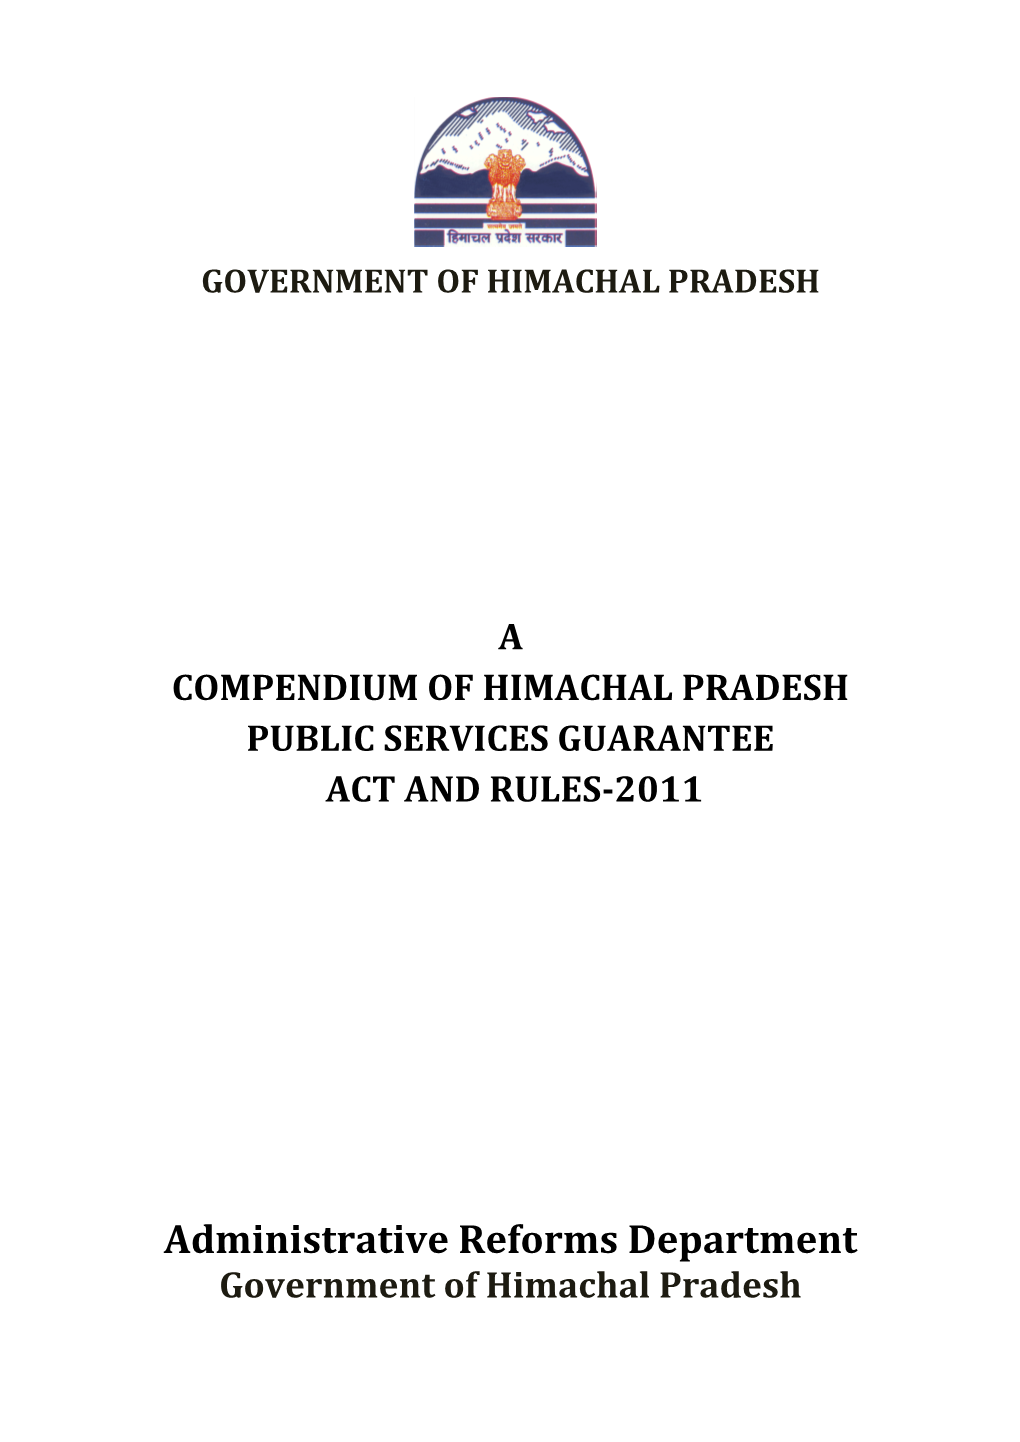 Administrative Reforms Department Government of Himachal Pradesh